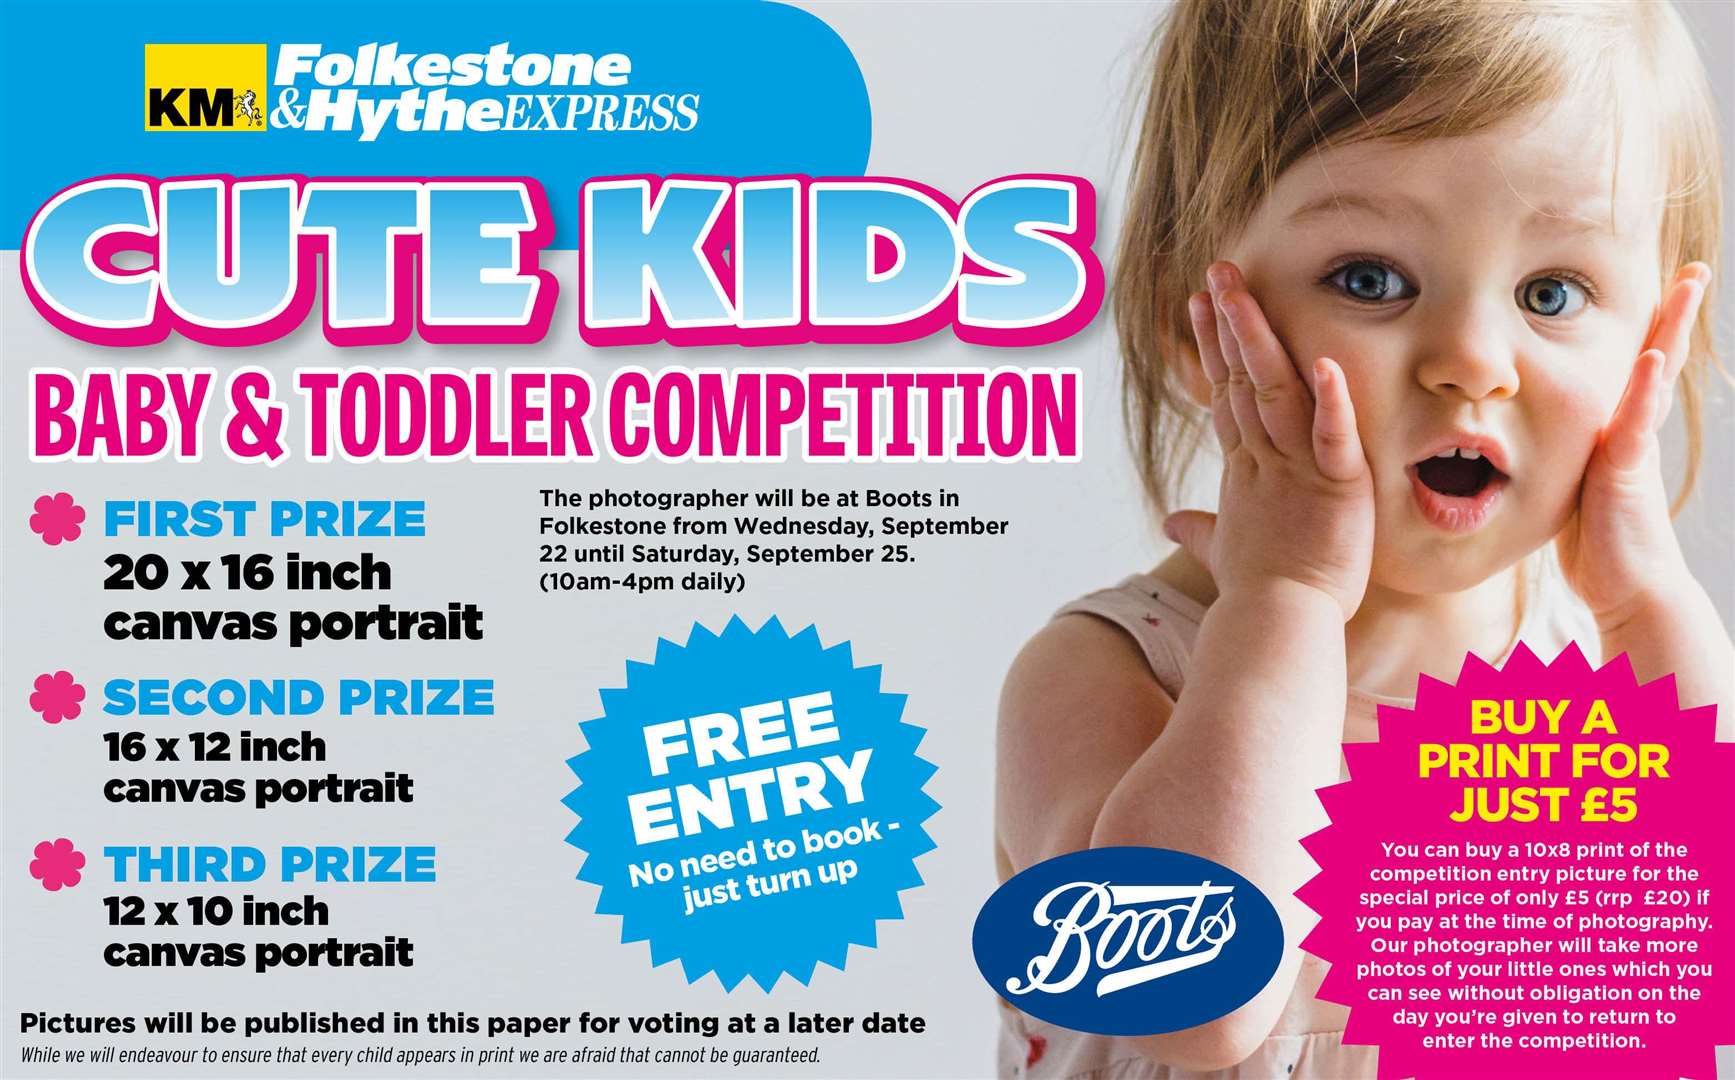 The KM's Cute Kids competition is back